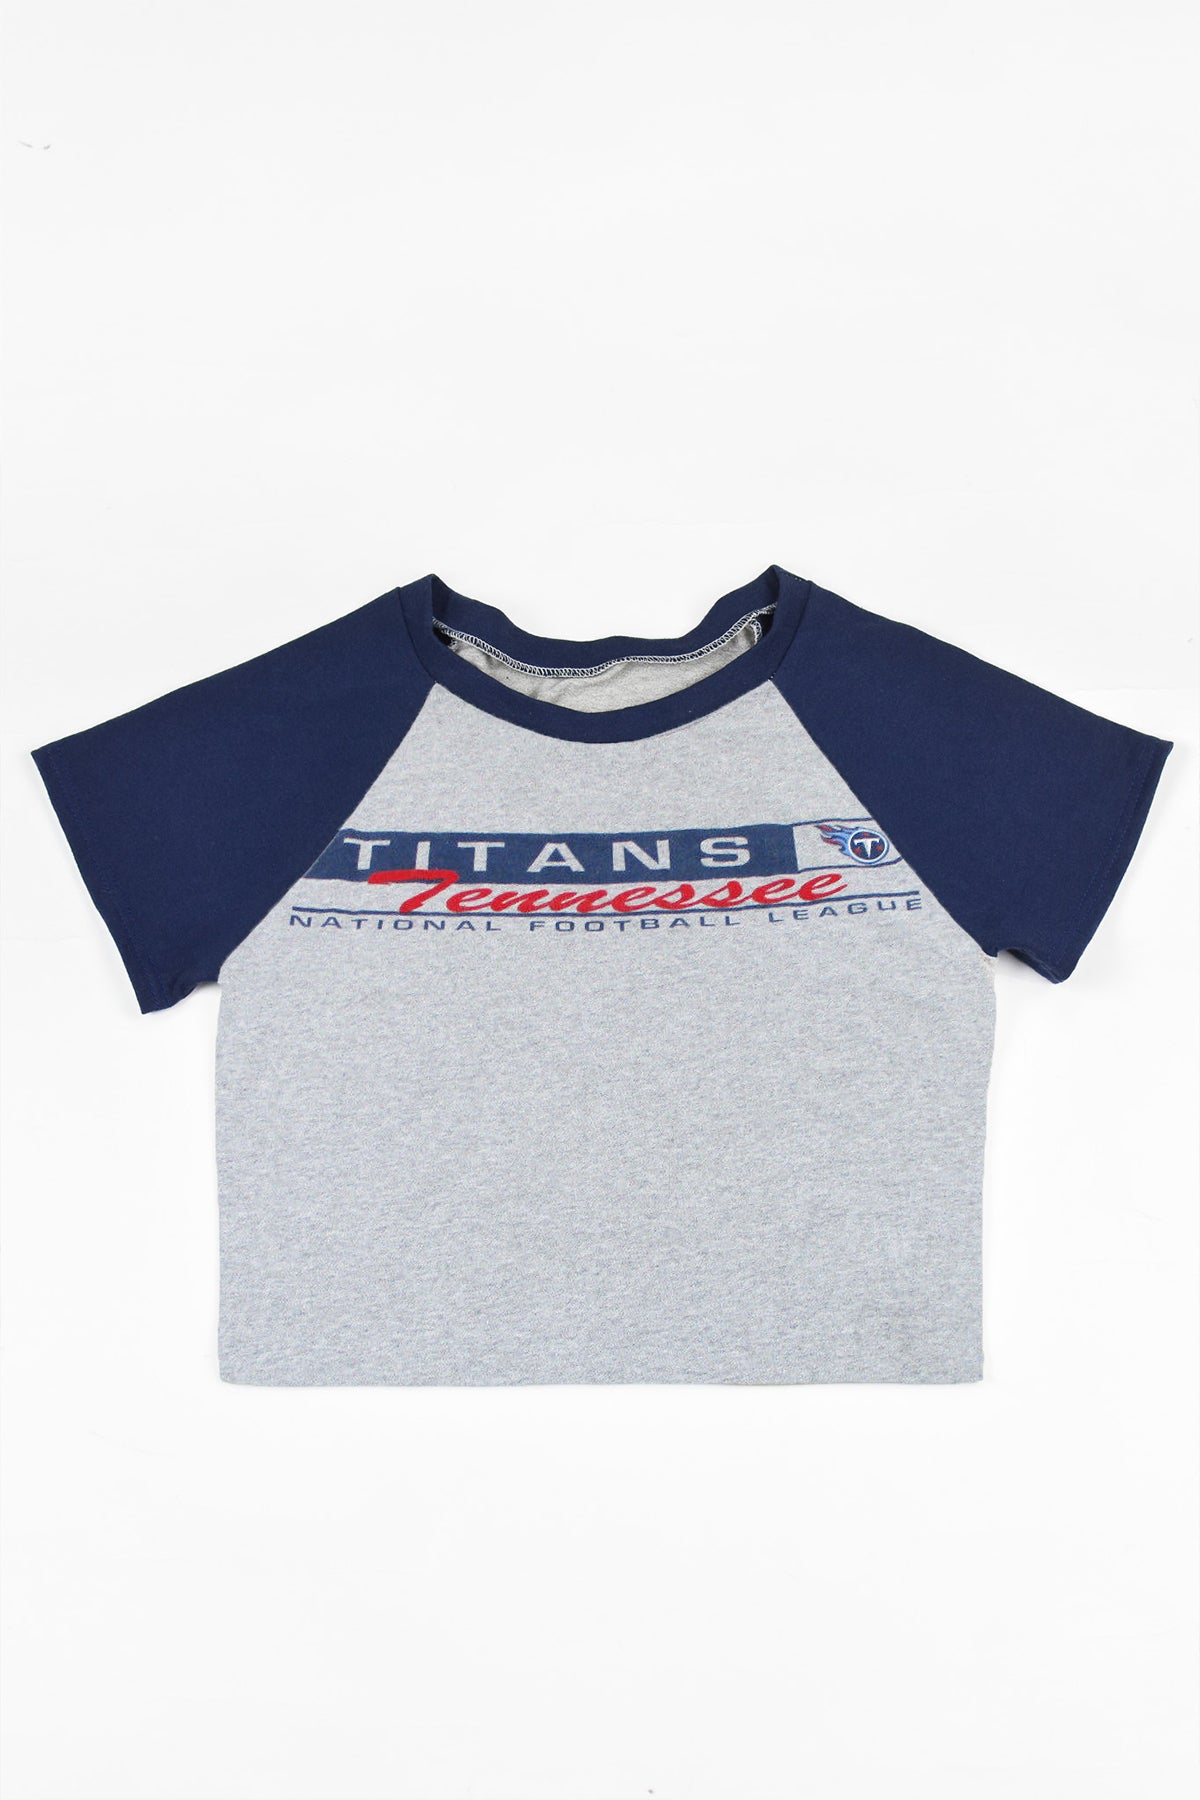 Upcycled Titans Baby Tee *MADE TO ORDER*